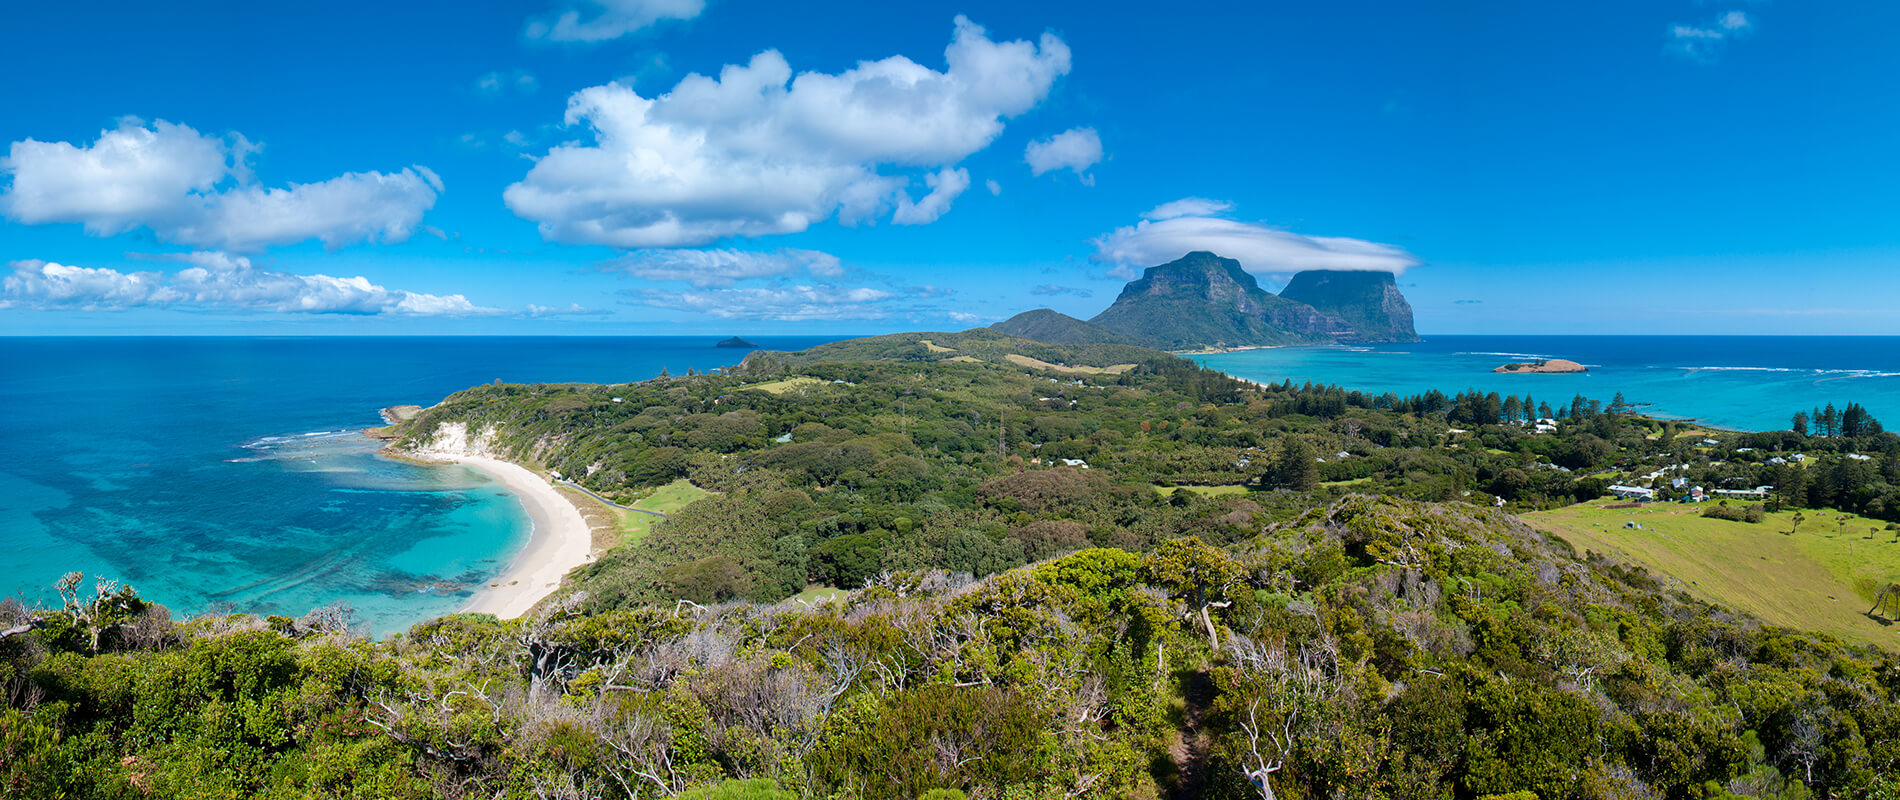 Lord Howe Island, an unspoiled paradise in the Pacific Ocean
